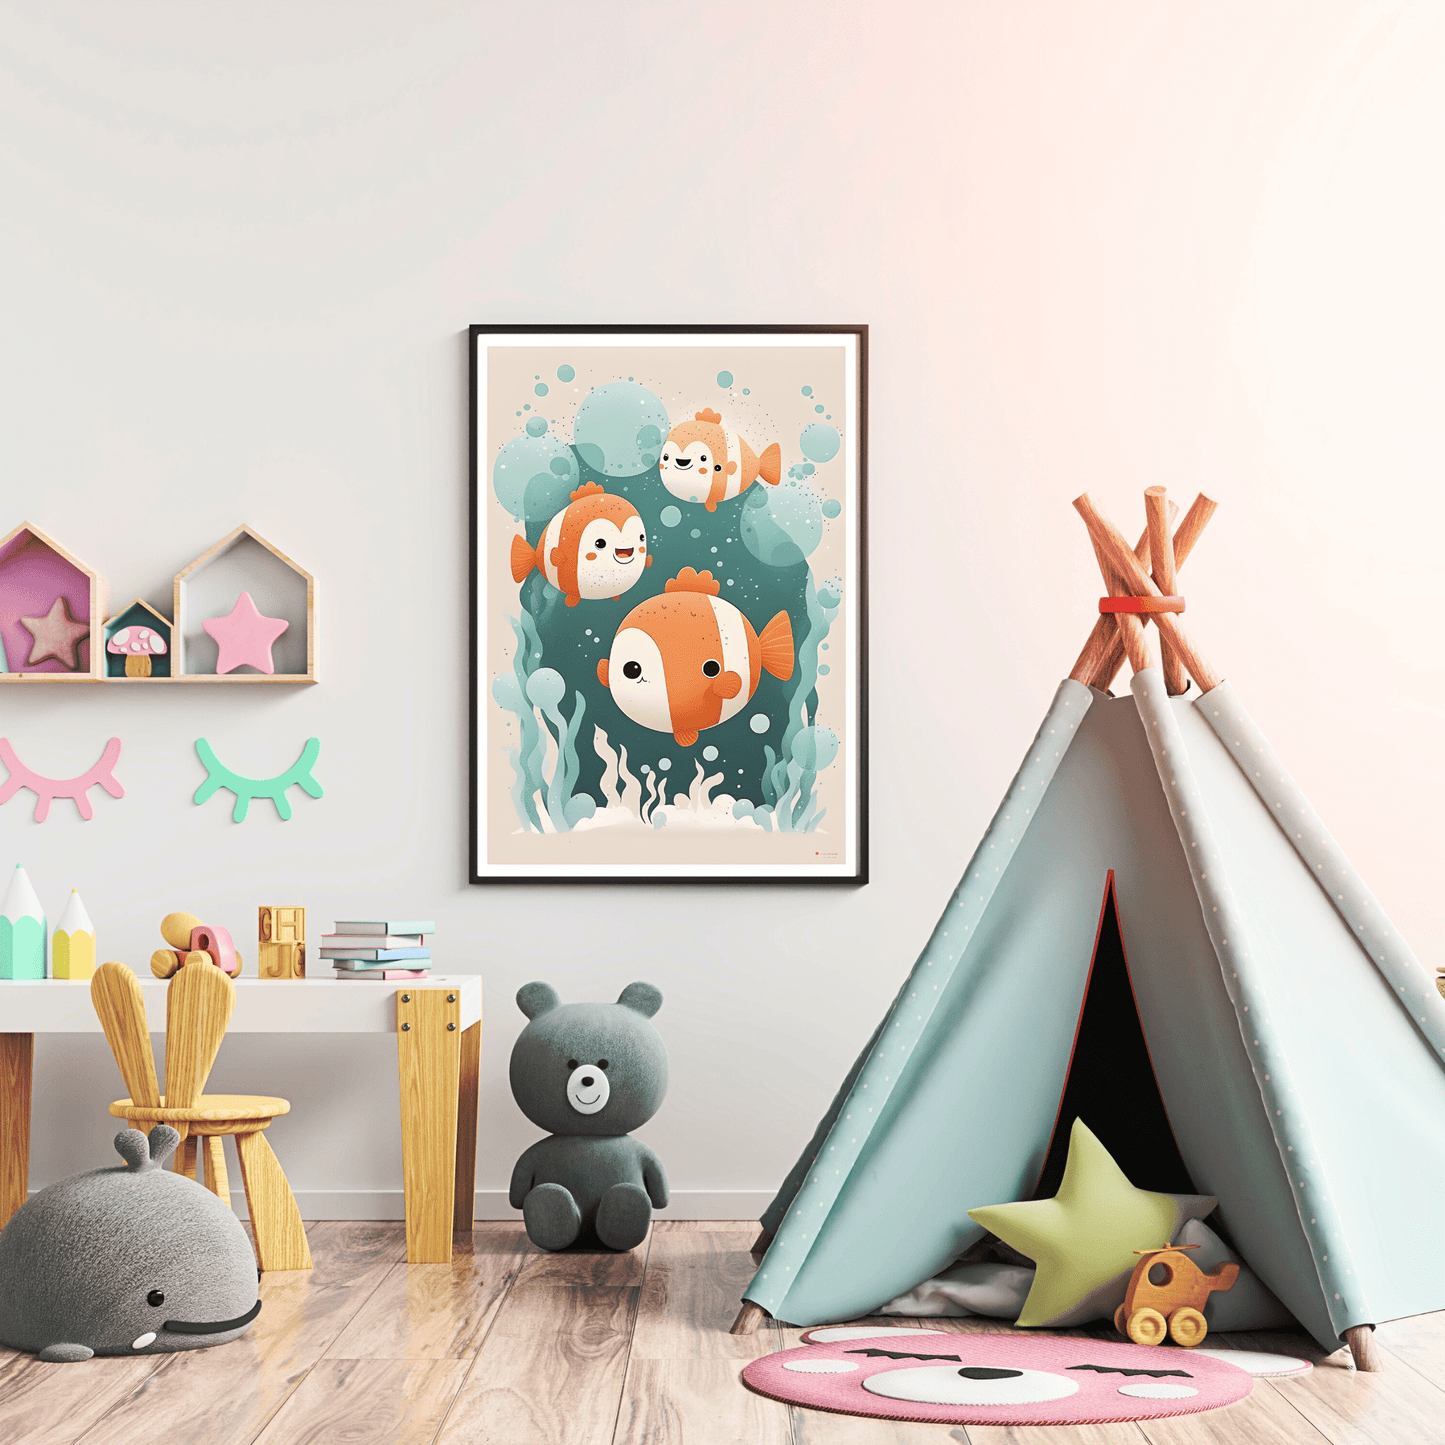 children's playroom decorated with a poster of clown fish on wall